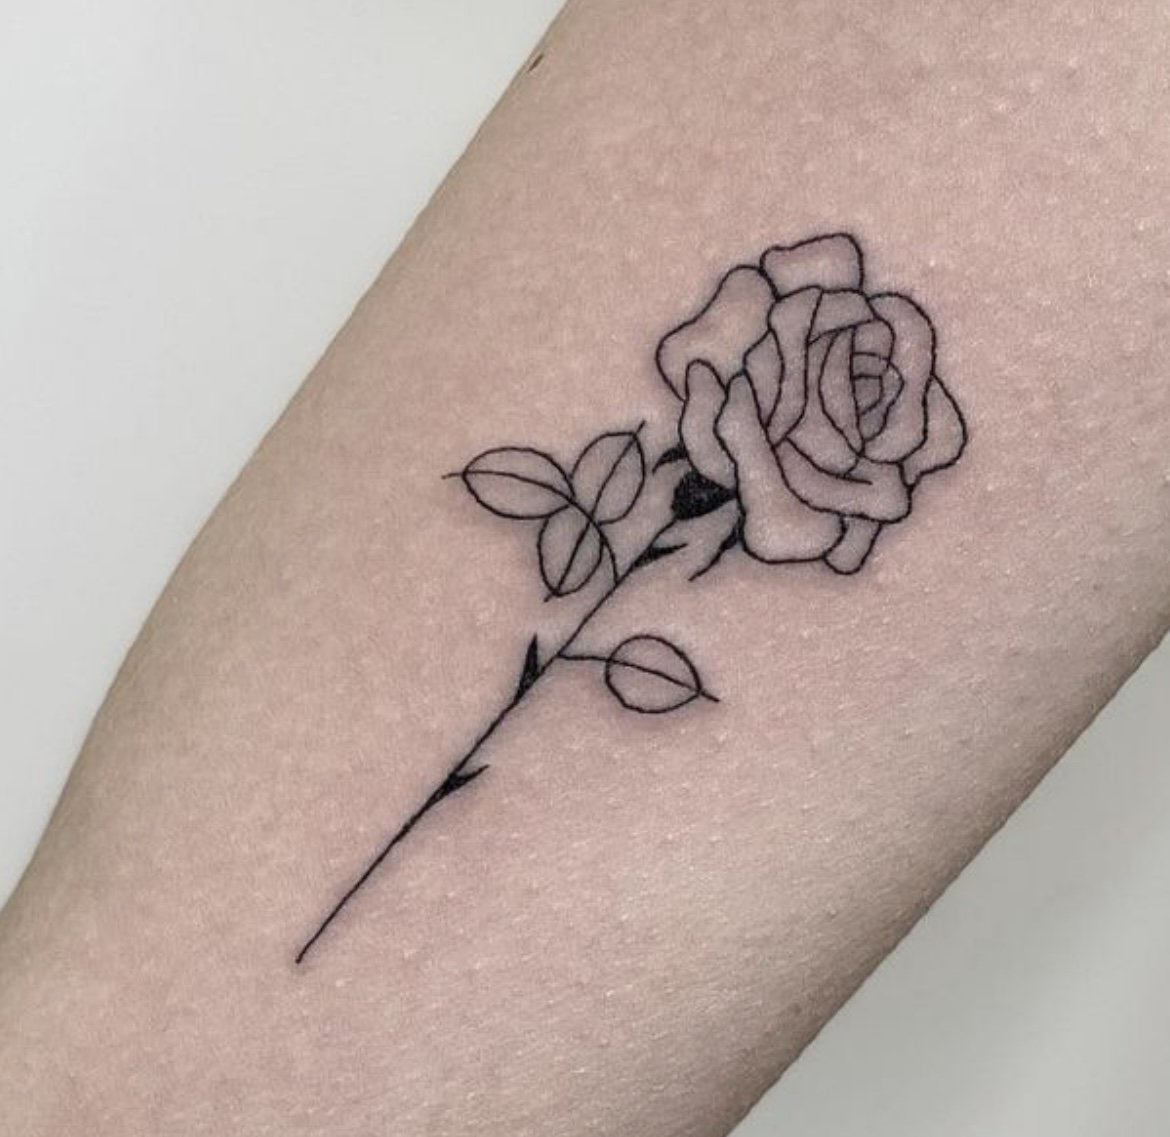 12 Simple And Chic Line Tattoo Designs You Wont Regret Getting